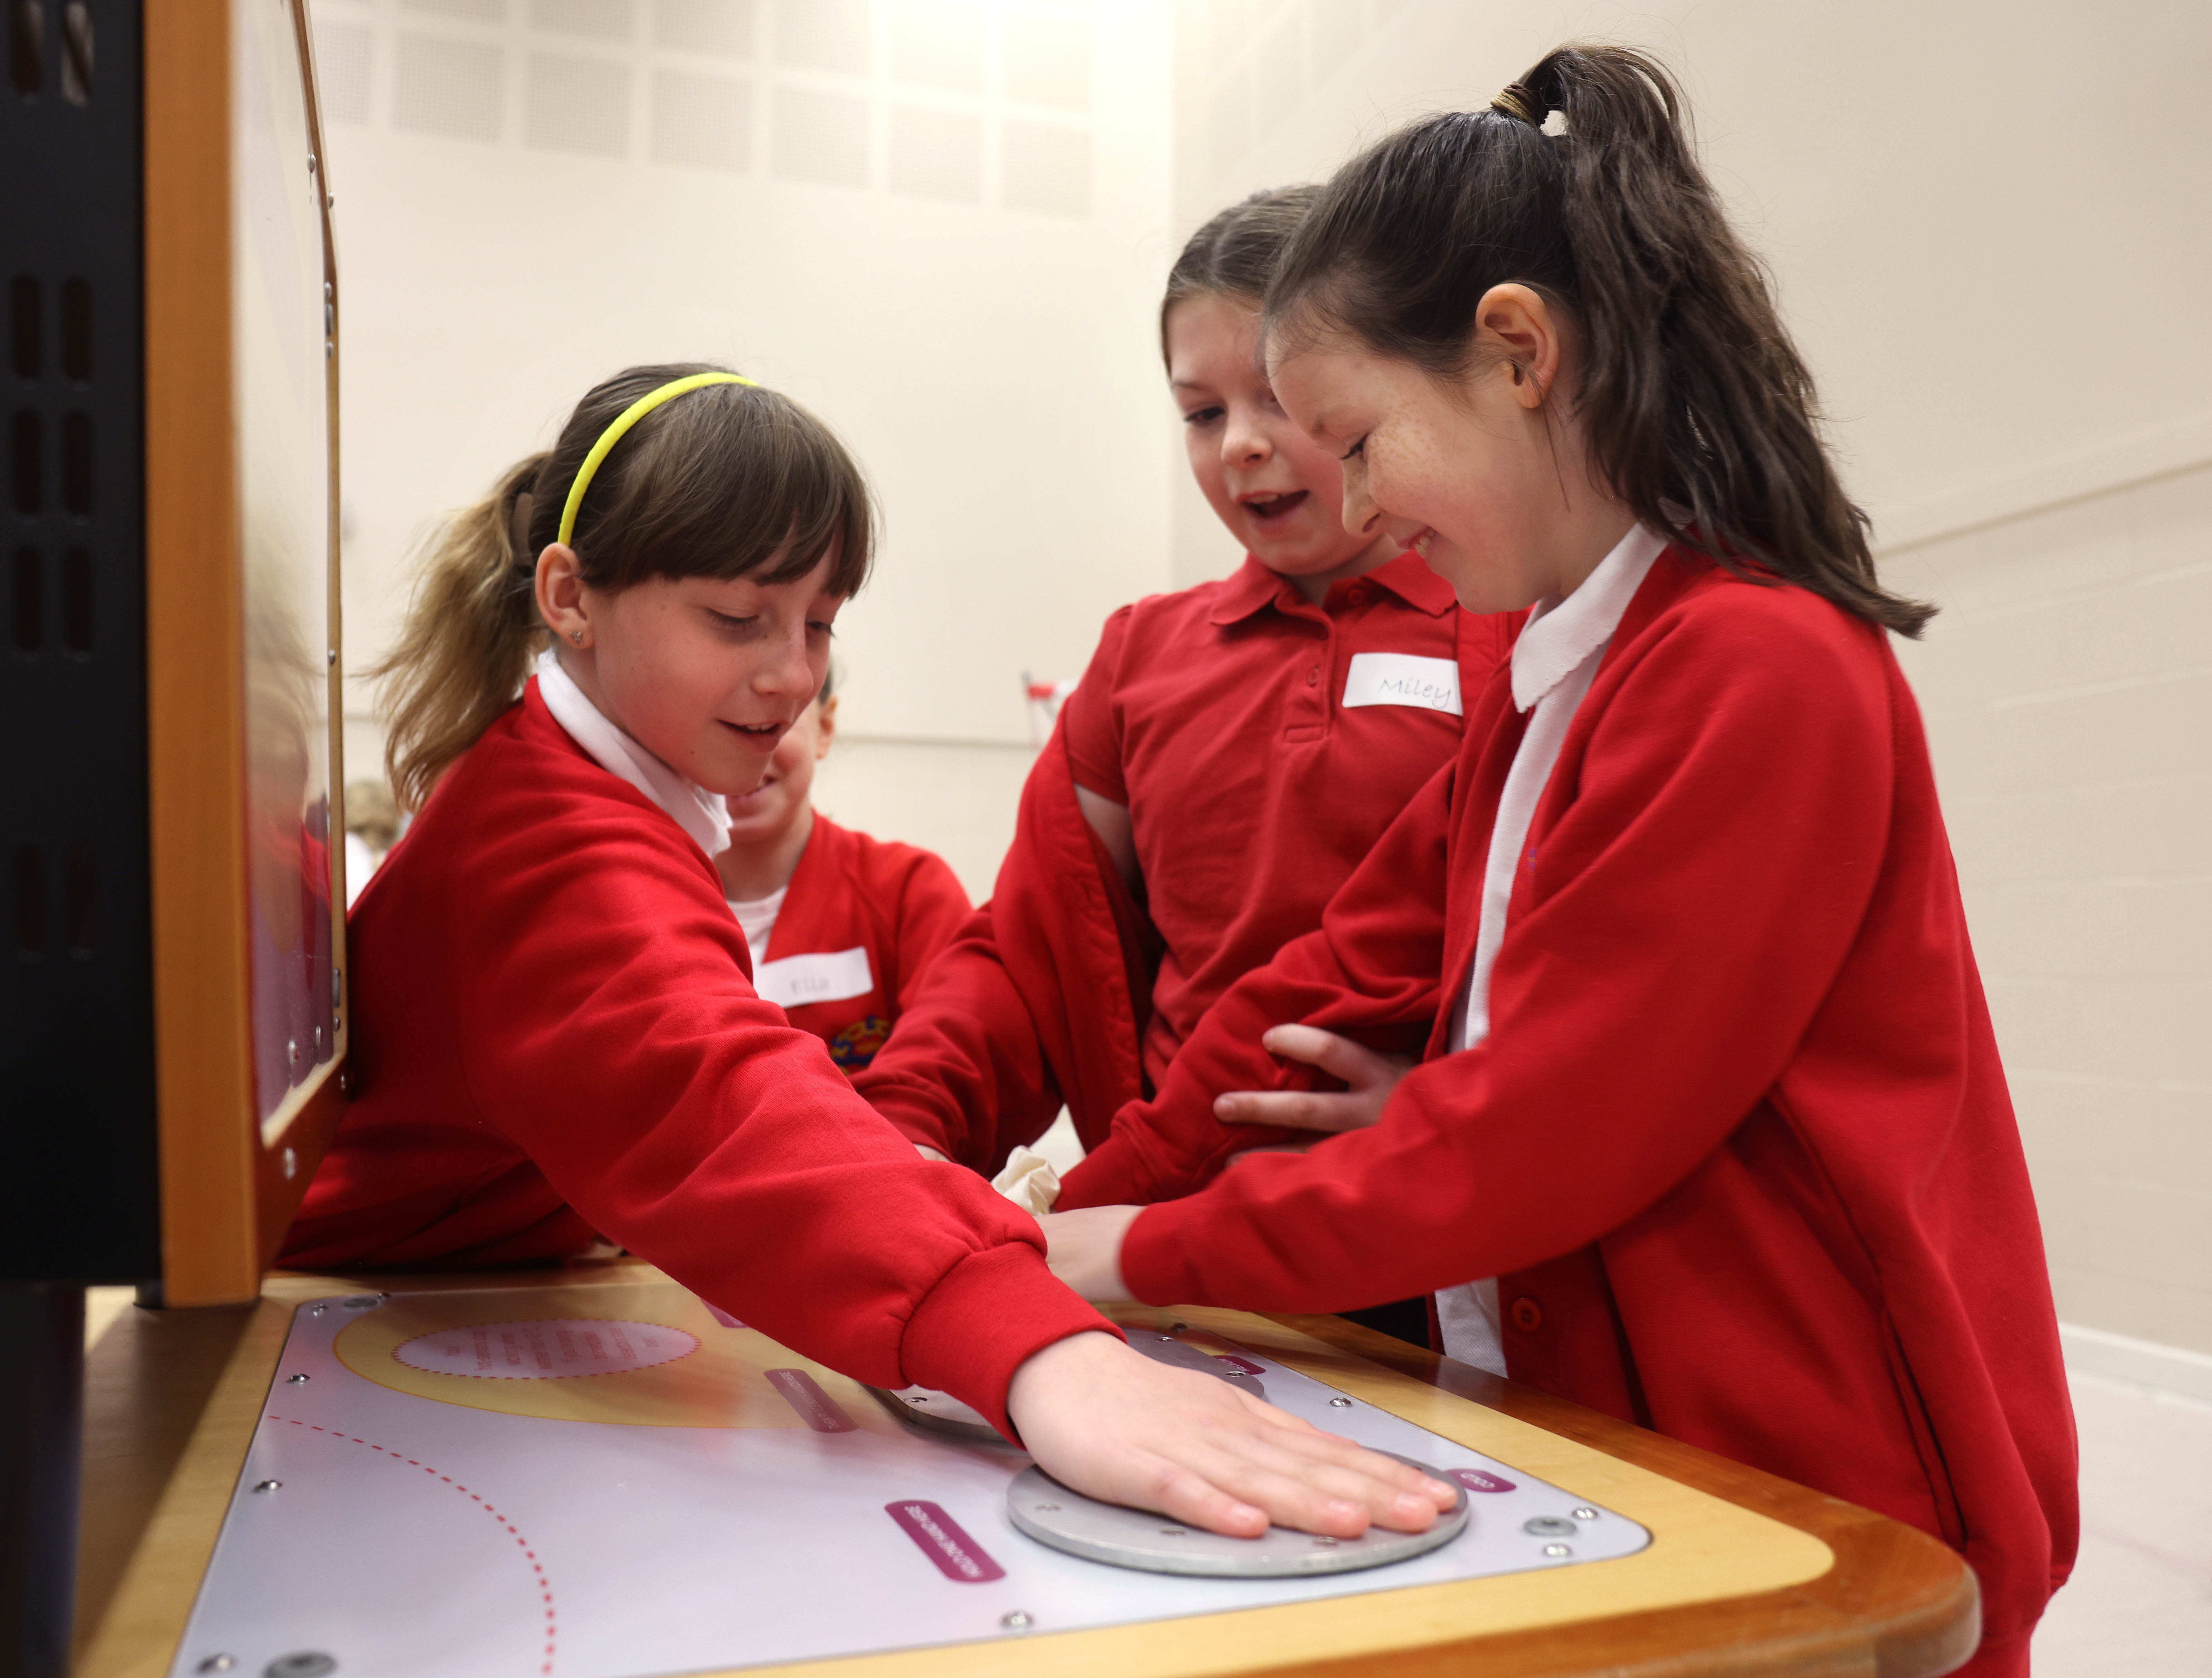 Photo courtesy of Cambridge Science Centre who were awarded a grant of £10,283 to deliver two STEM Roadshows over two academic years at a school located within Ørsted's East Coast Community Fund area